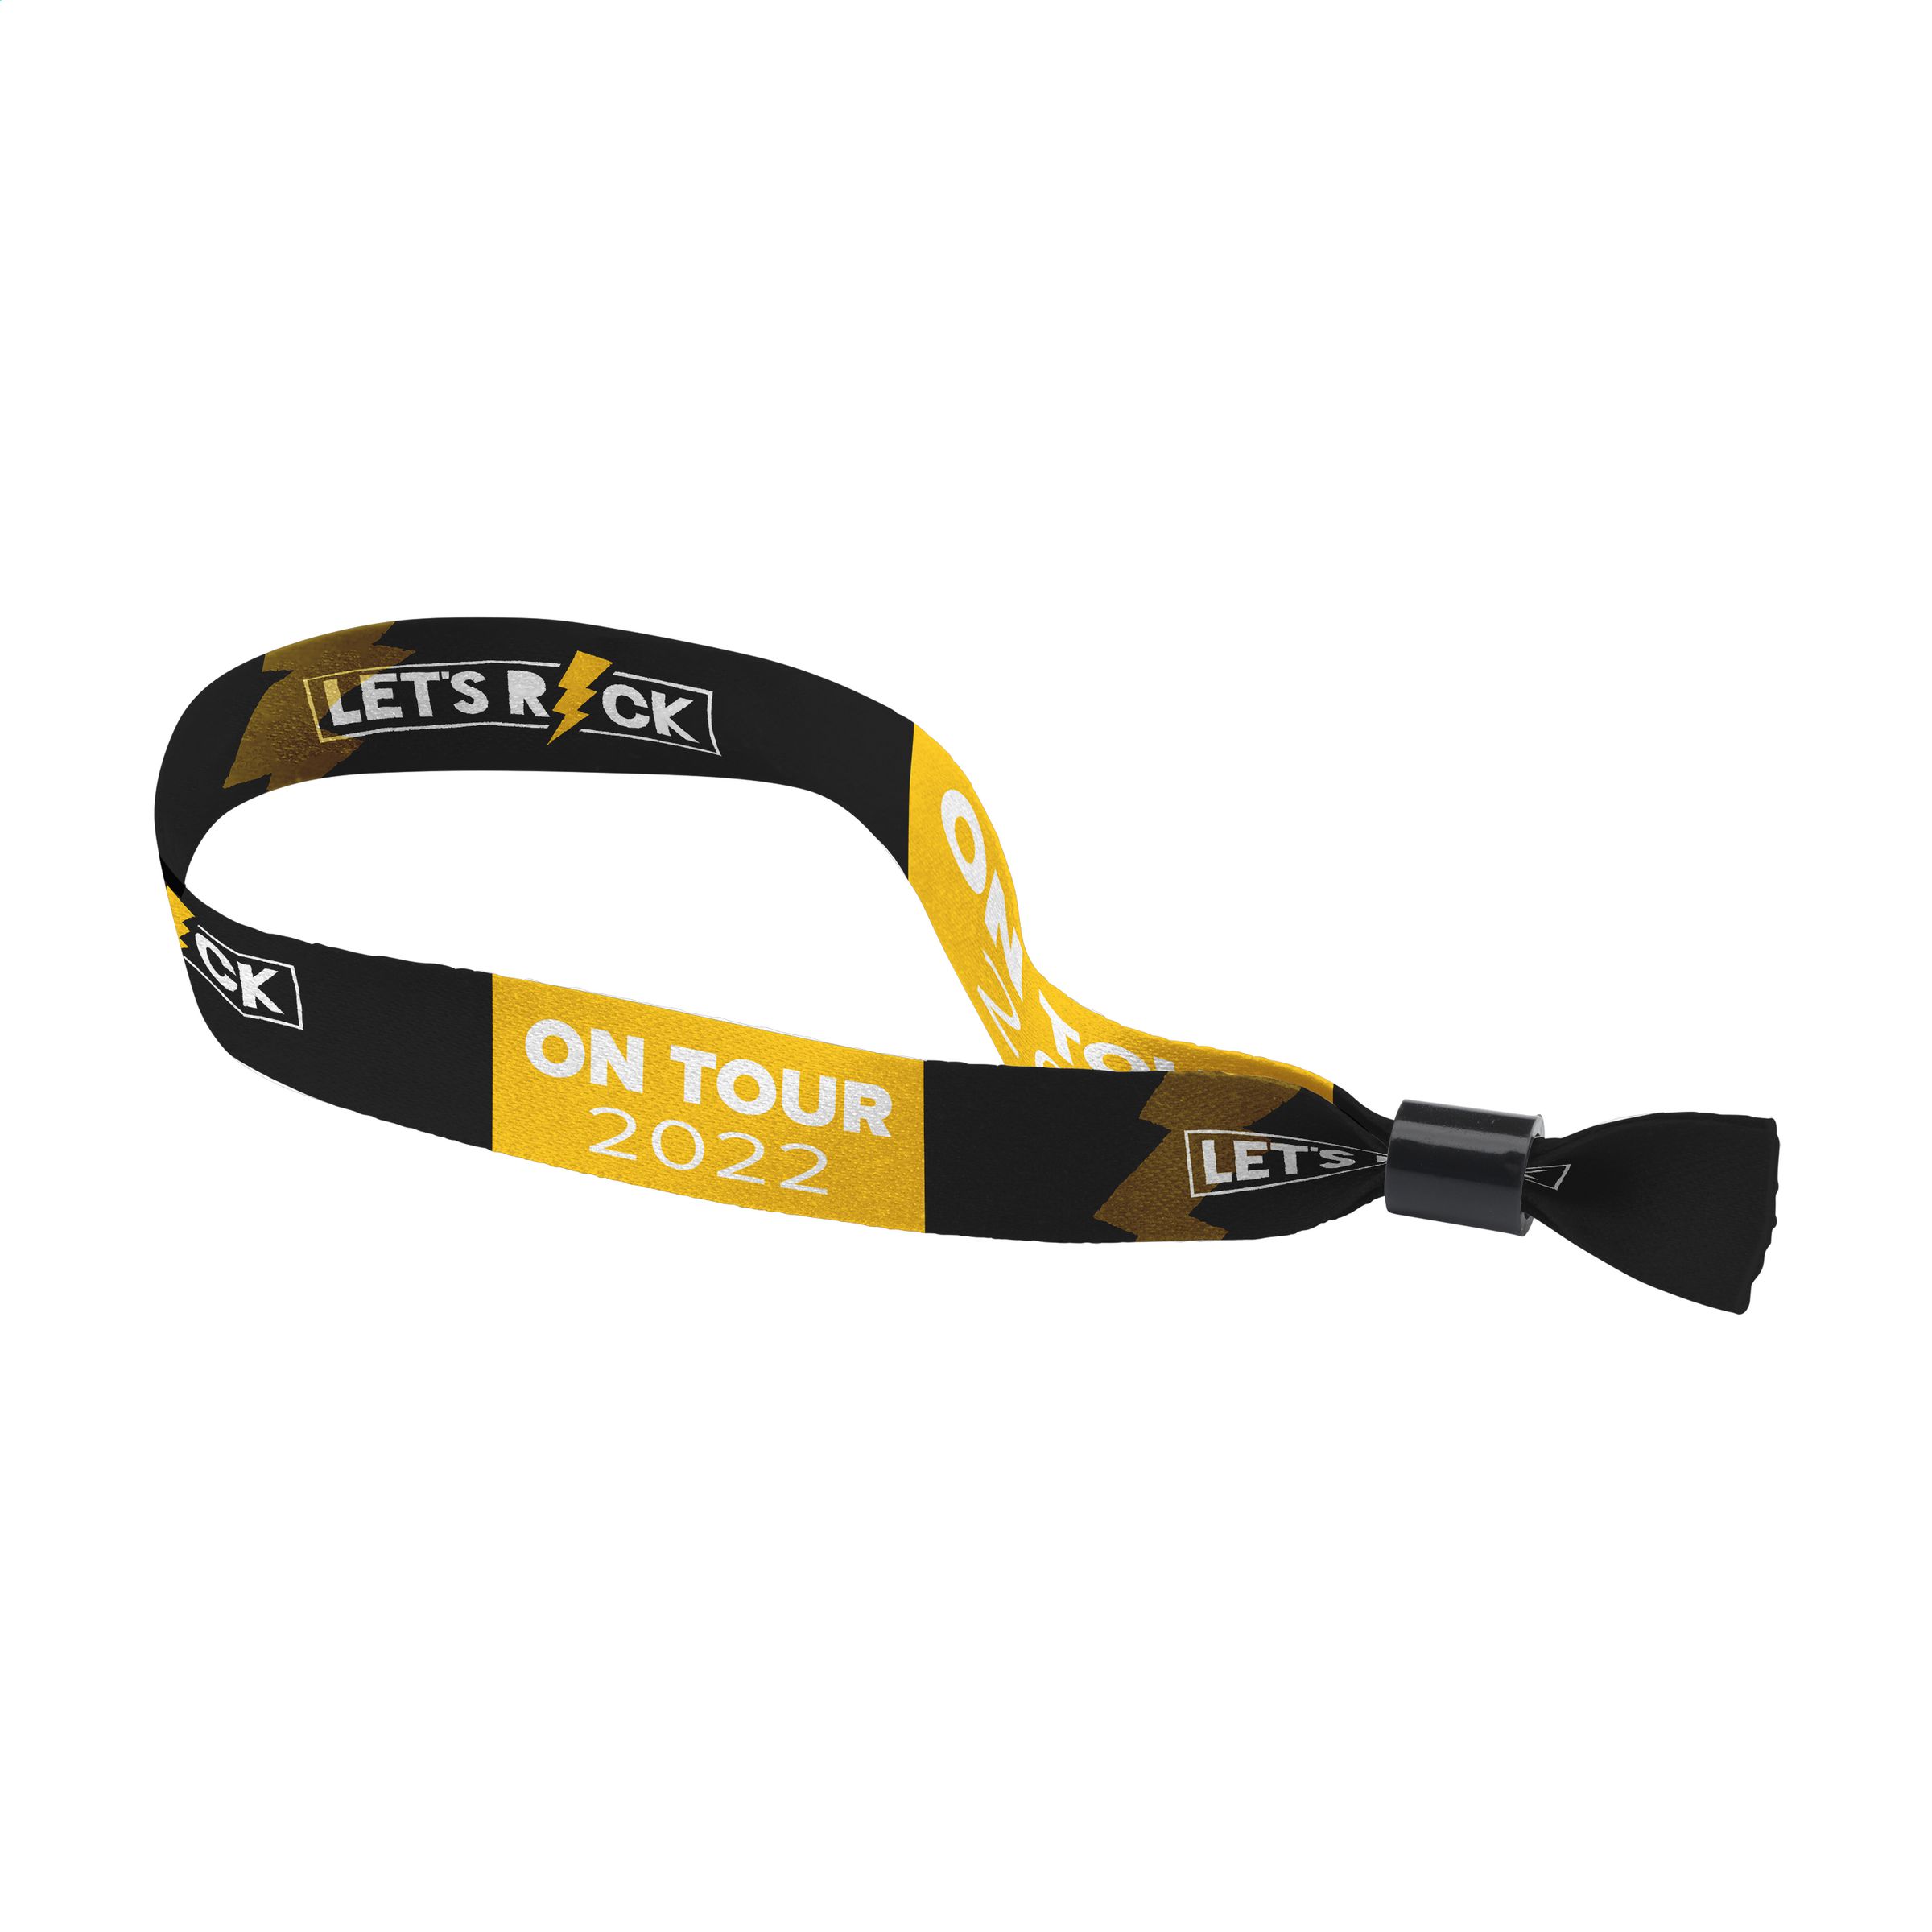 RPET Polyester Festival Strap with Self-Grip Closure - Carlton-le-Moorland